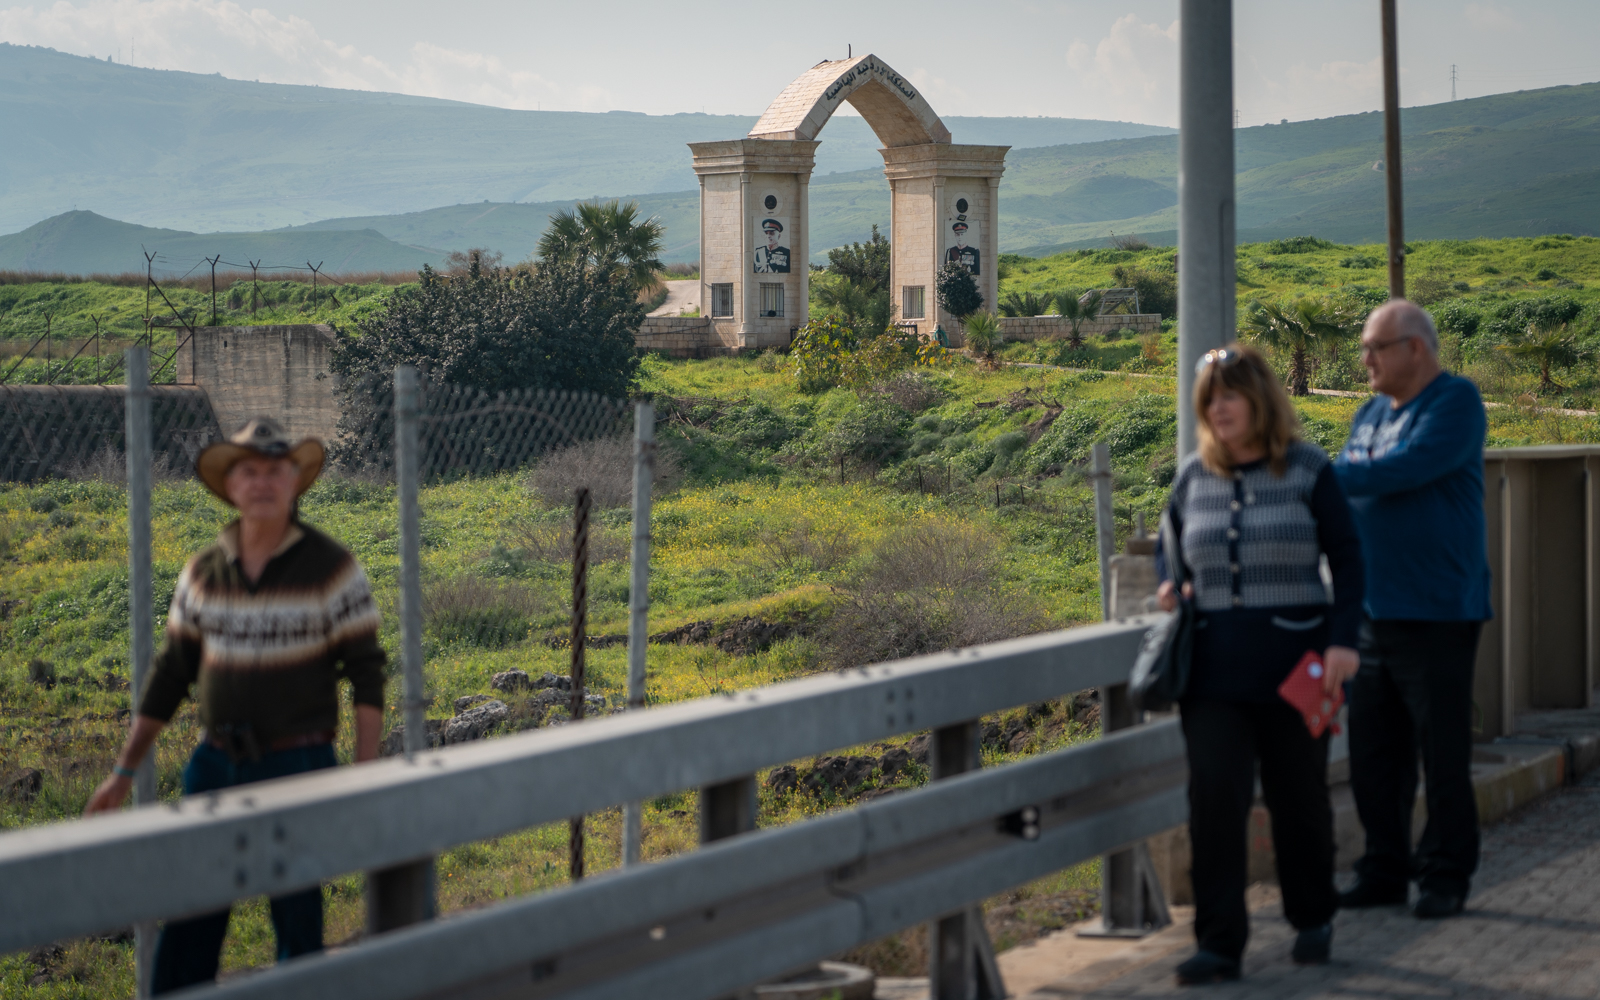 Israeli tourists in front of the border crossing into the Island of Peace, January 29, 2019. (Luke Tress/Times of Israel)